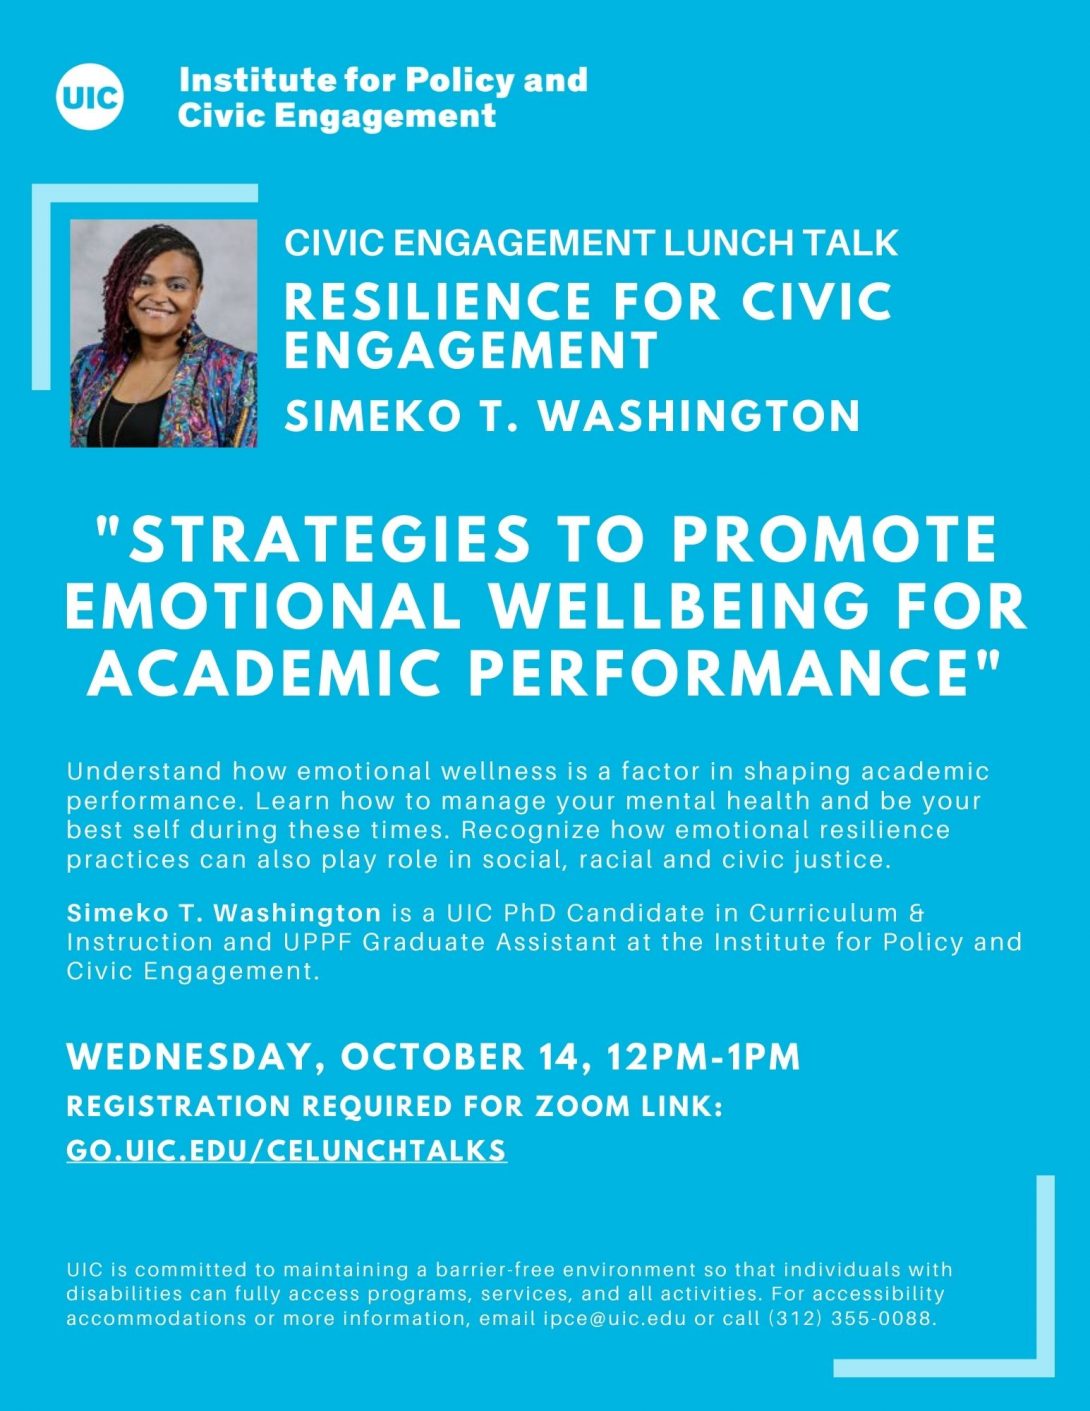 Civic engagement lunch talk